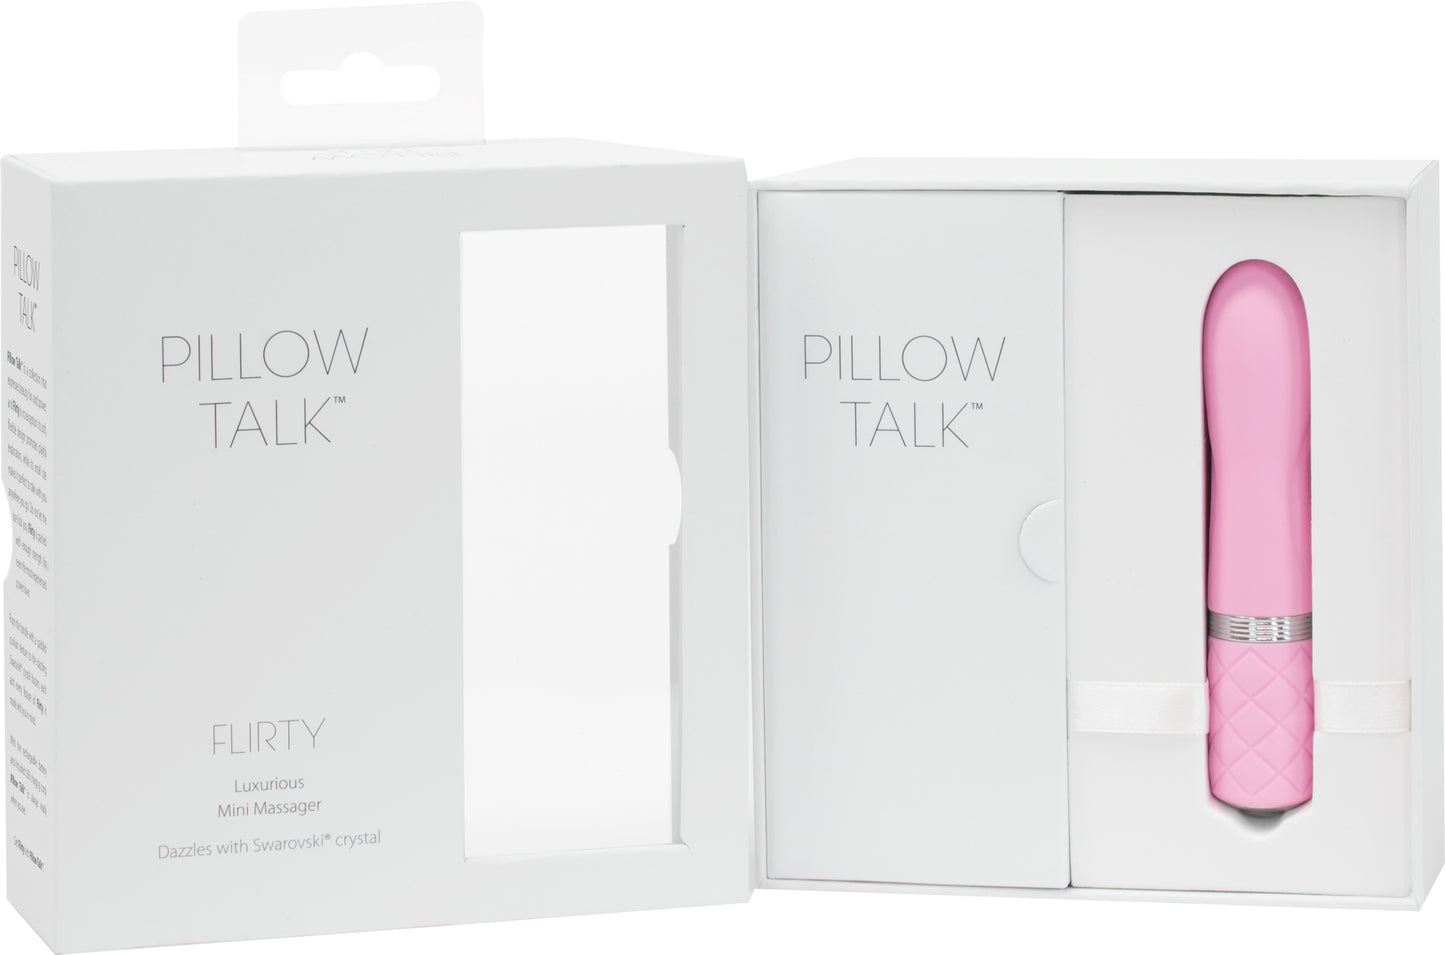 Pillow Talk Flirty in its box with the lid open showing the toy inside (pink).